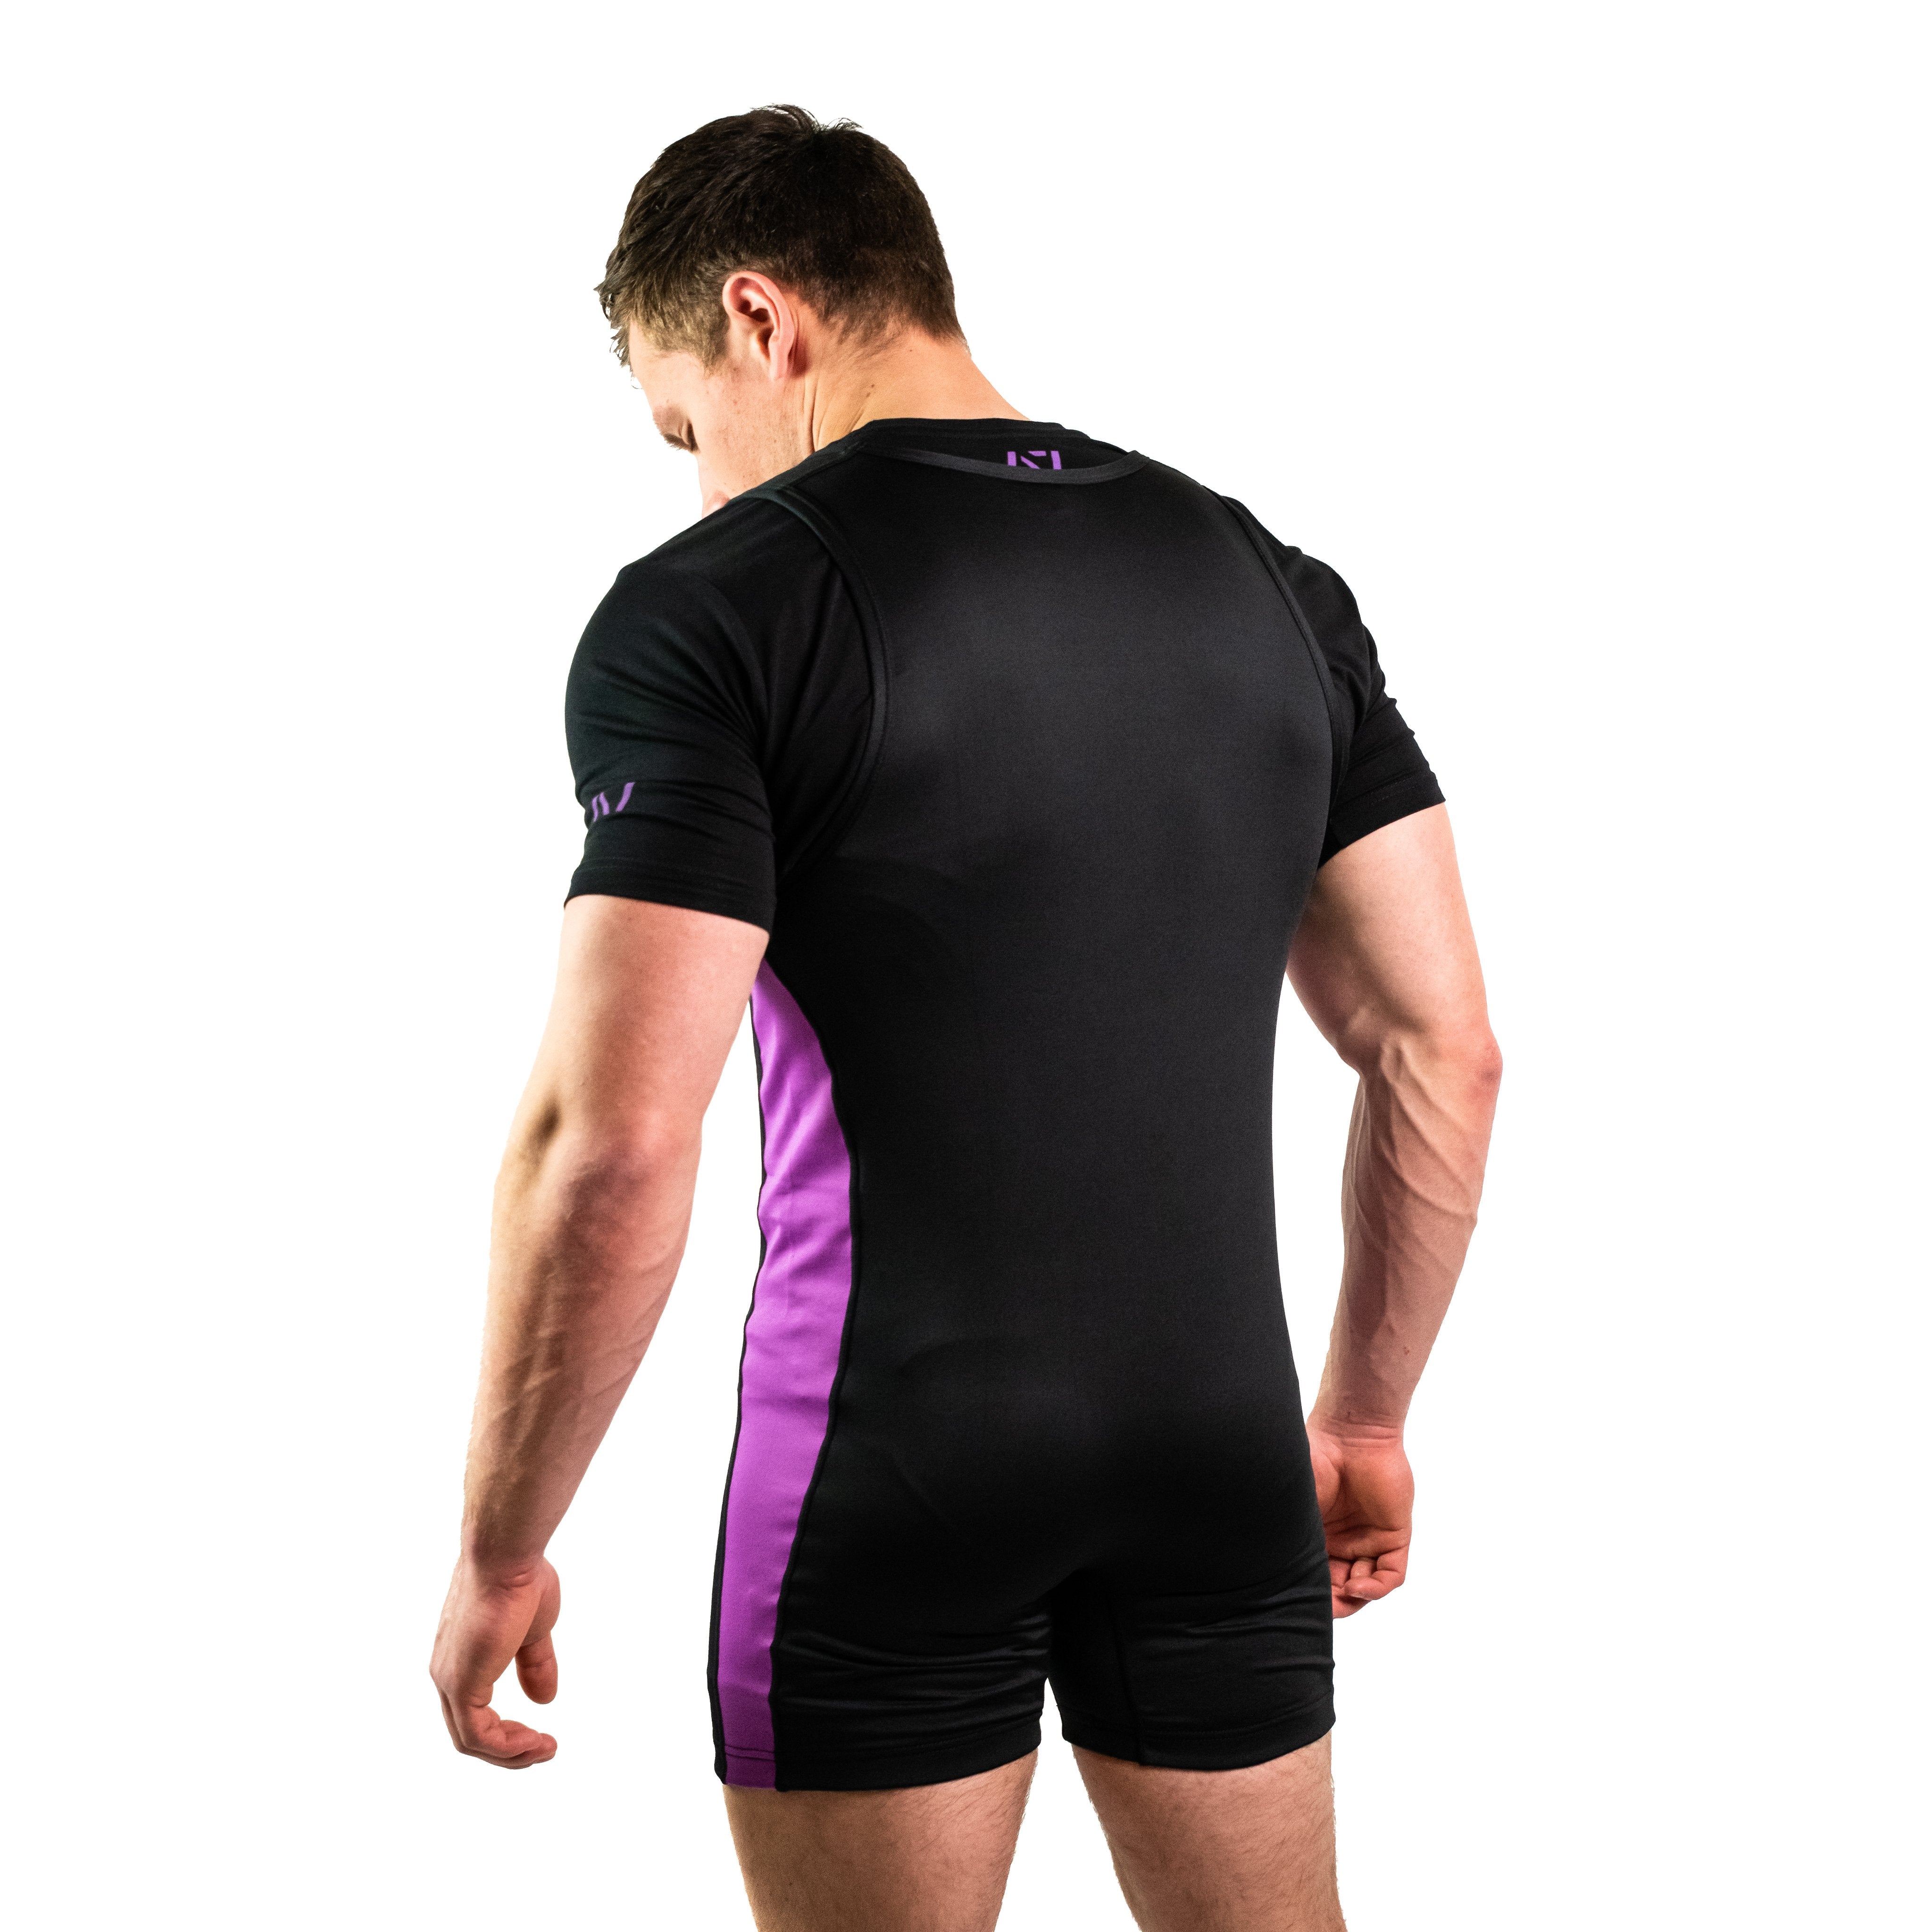 A7 IPF Approved Powerlifting Singlet is designed exclusively for powerlifting. It is very comfortable to wear and feels soft on bare skin. A7 Powerlifting Singlet is made from breathable fabric and provides compression during your lifts. The perfect piece of IPF Approved Kit! A7 Europe shipping to EU including France, Italy, Poland, Sweden, Netherlands..